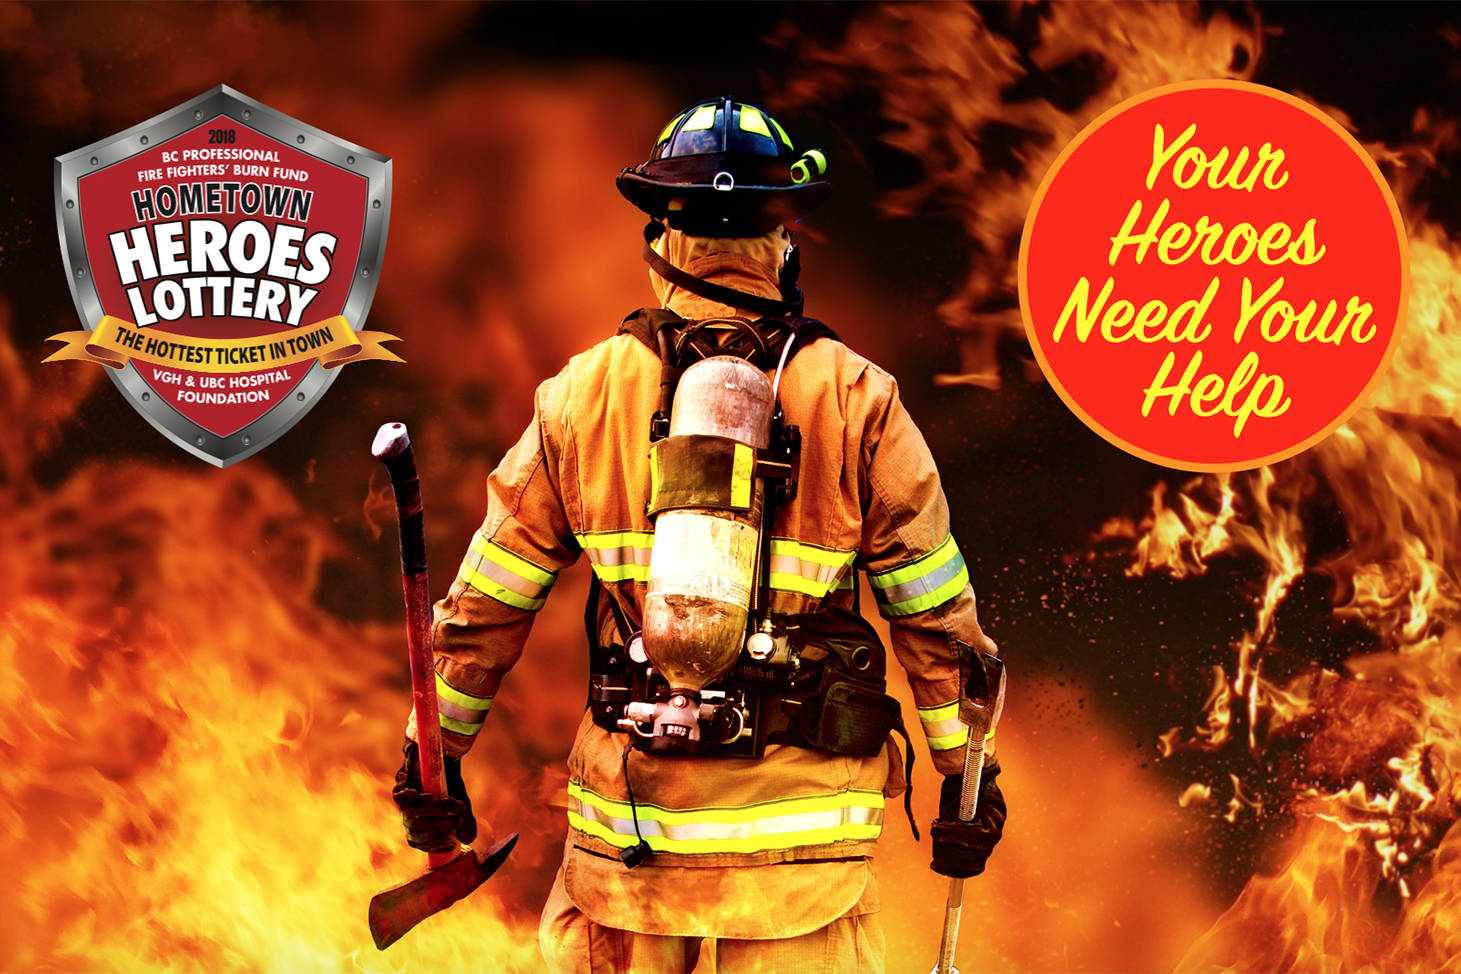 12365655_web1_Heroes-Firefighter-Cause--BP-Story